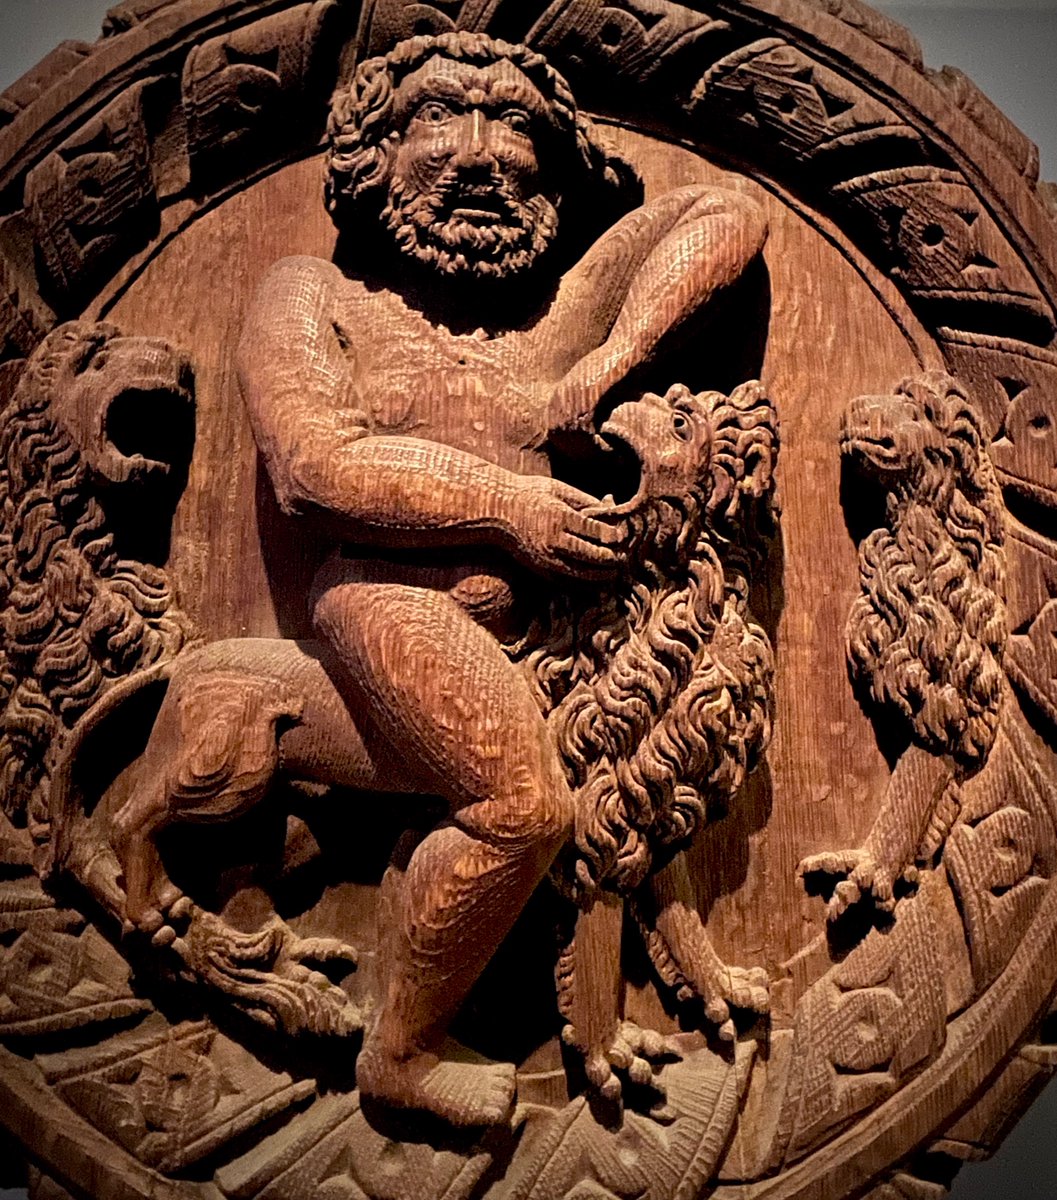 Just some of the remaining 34 C16th carvings commissioned by James V to celebrate the opulent wealth and connections of the Scottish monarchy. Stirling Castle.